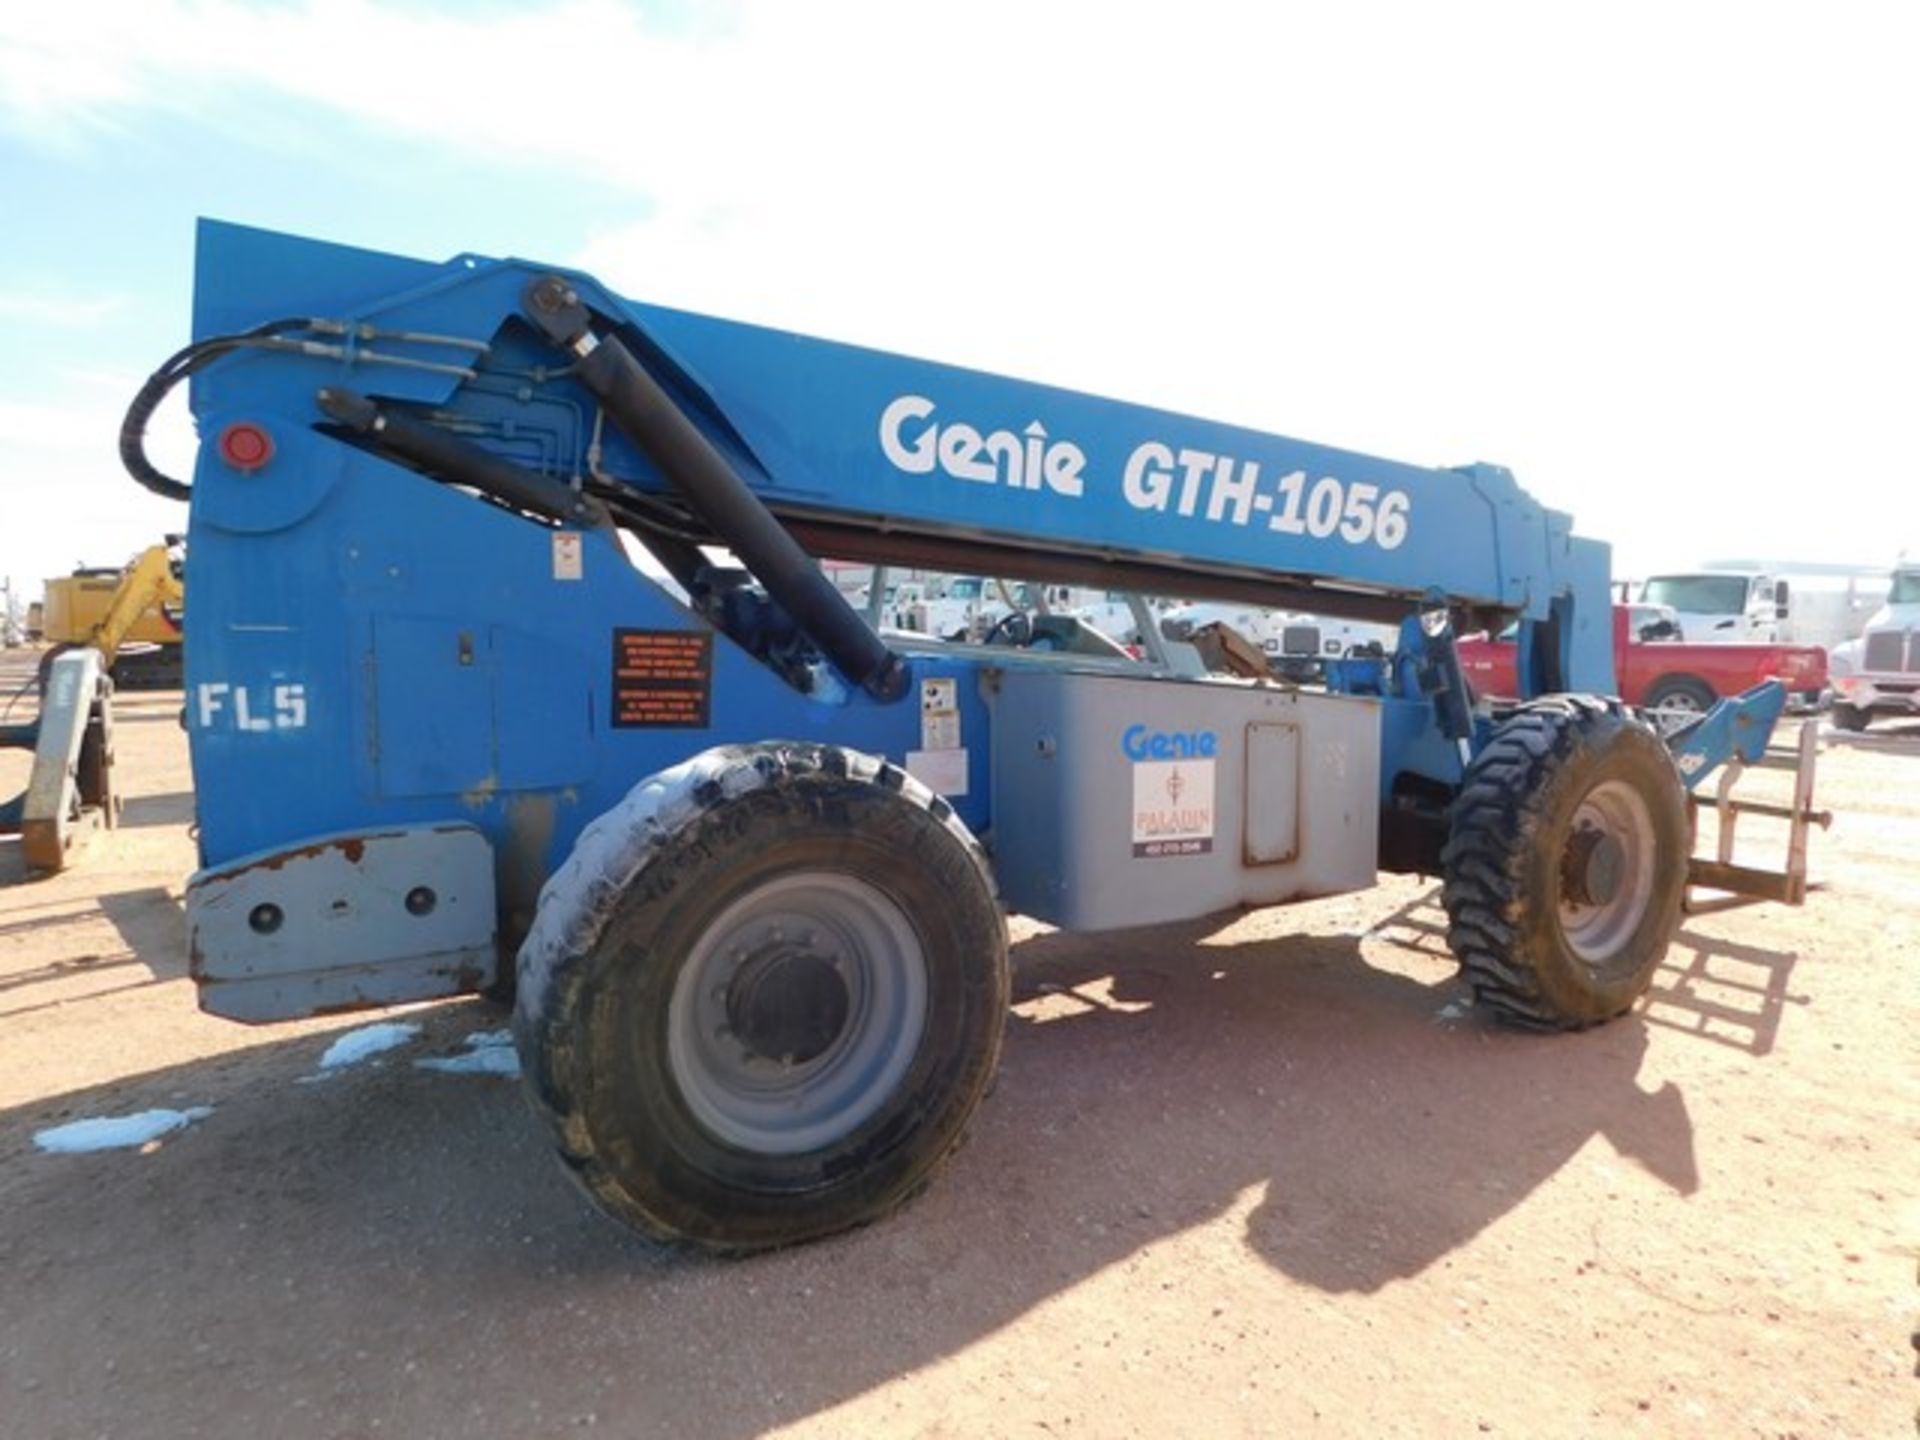 Located in YARD 1 - Midland, TX (1906) 2012 GENIE GTH - 1056 TELESCOPIC FORKLIFT - Image 6 of 7